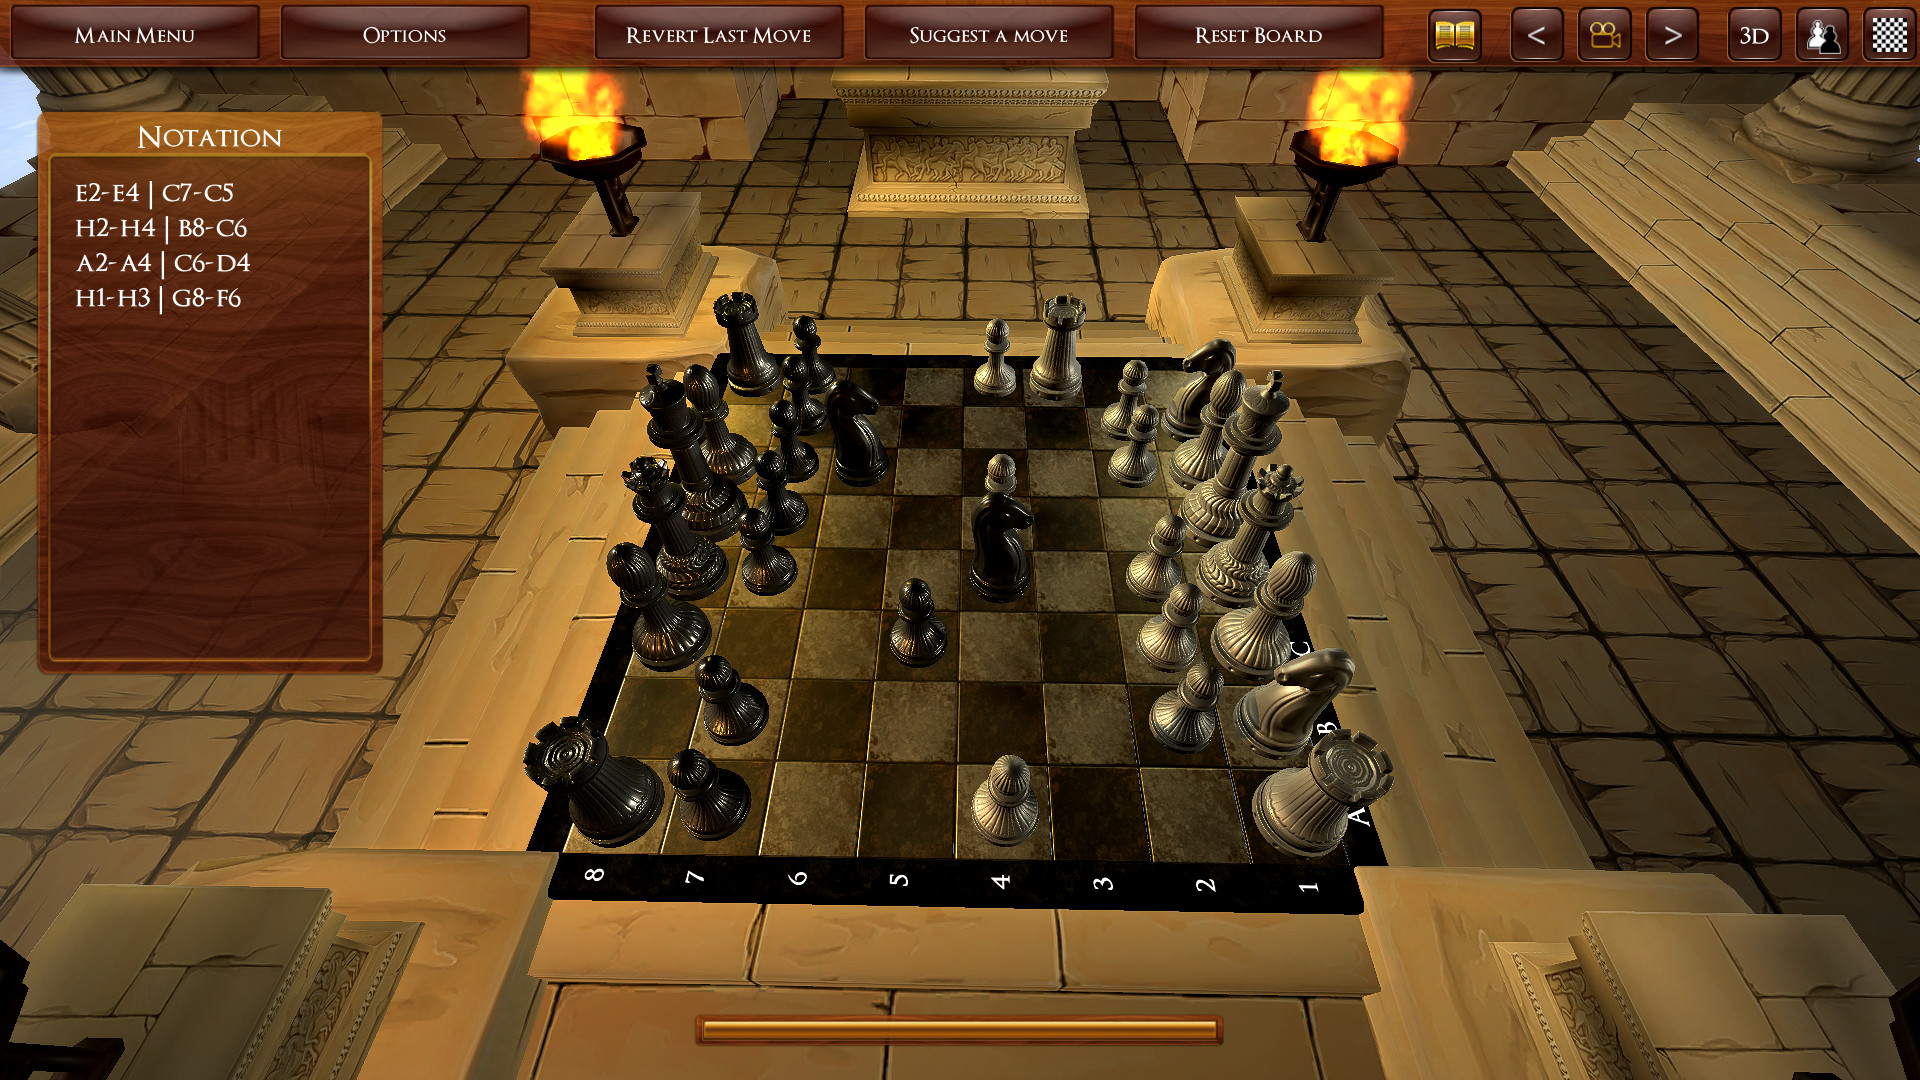 🕹️ Play Chess Game: Free Online Chess Video Game Against